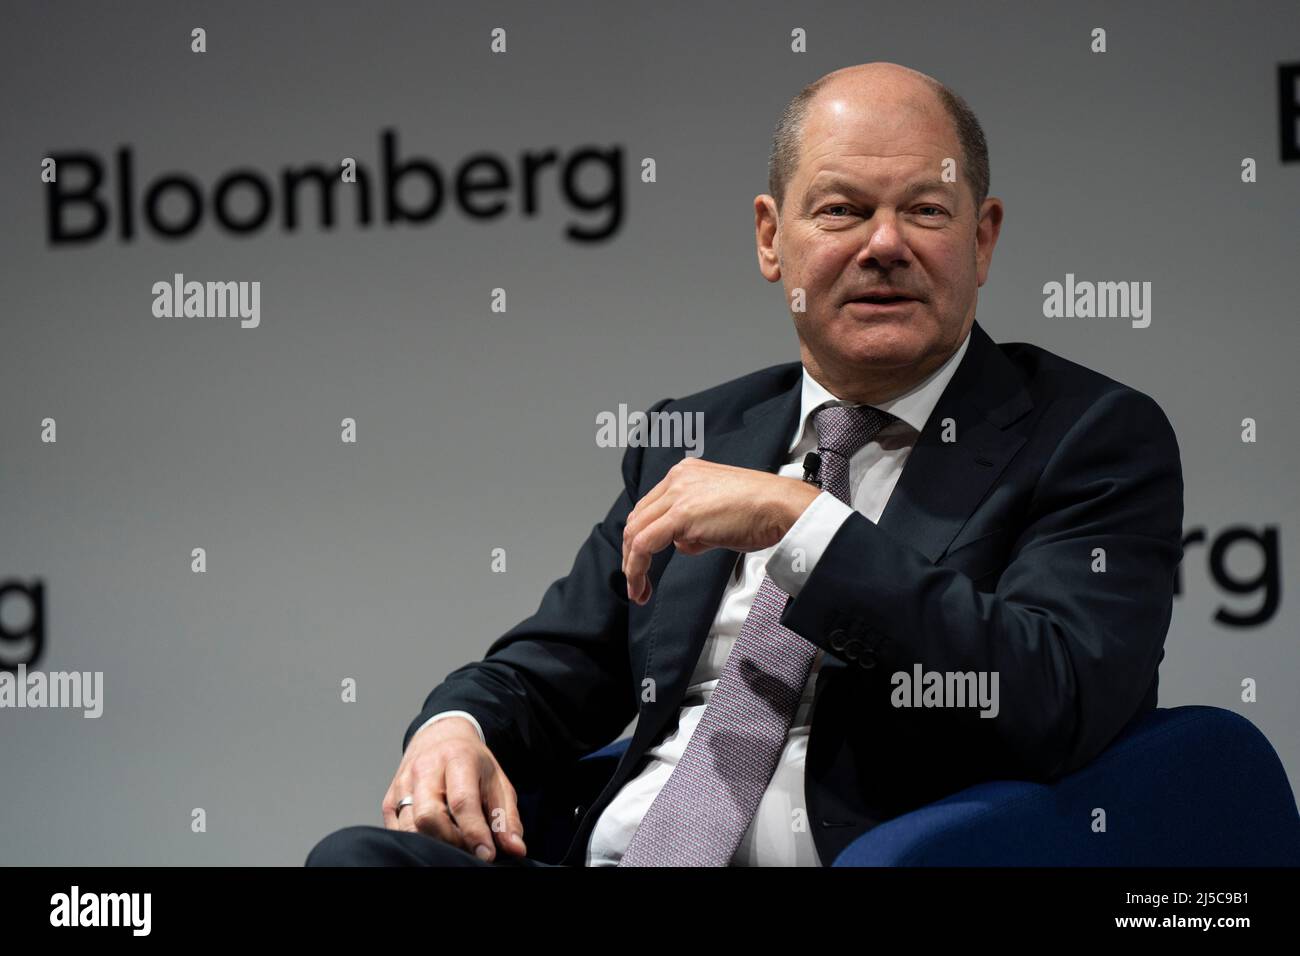 German Chancellor Olaf Scholz in London, February 2019  Photo by David Levenson/Alamy Stock Photo